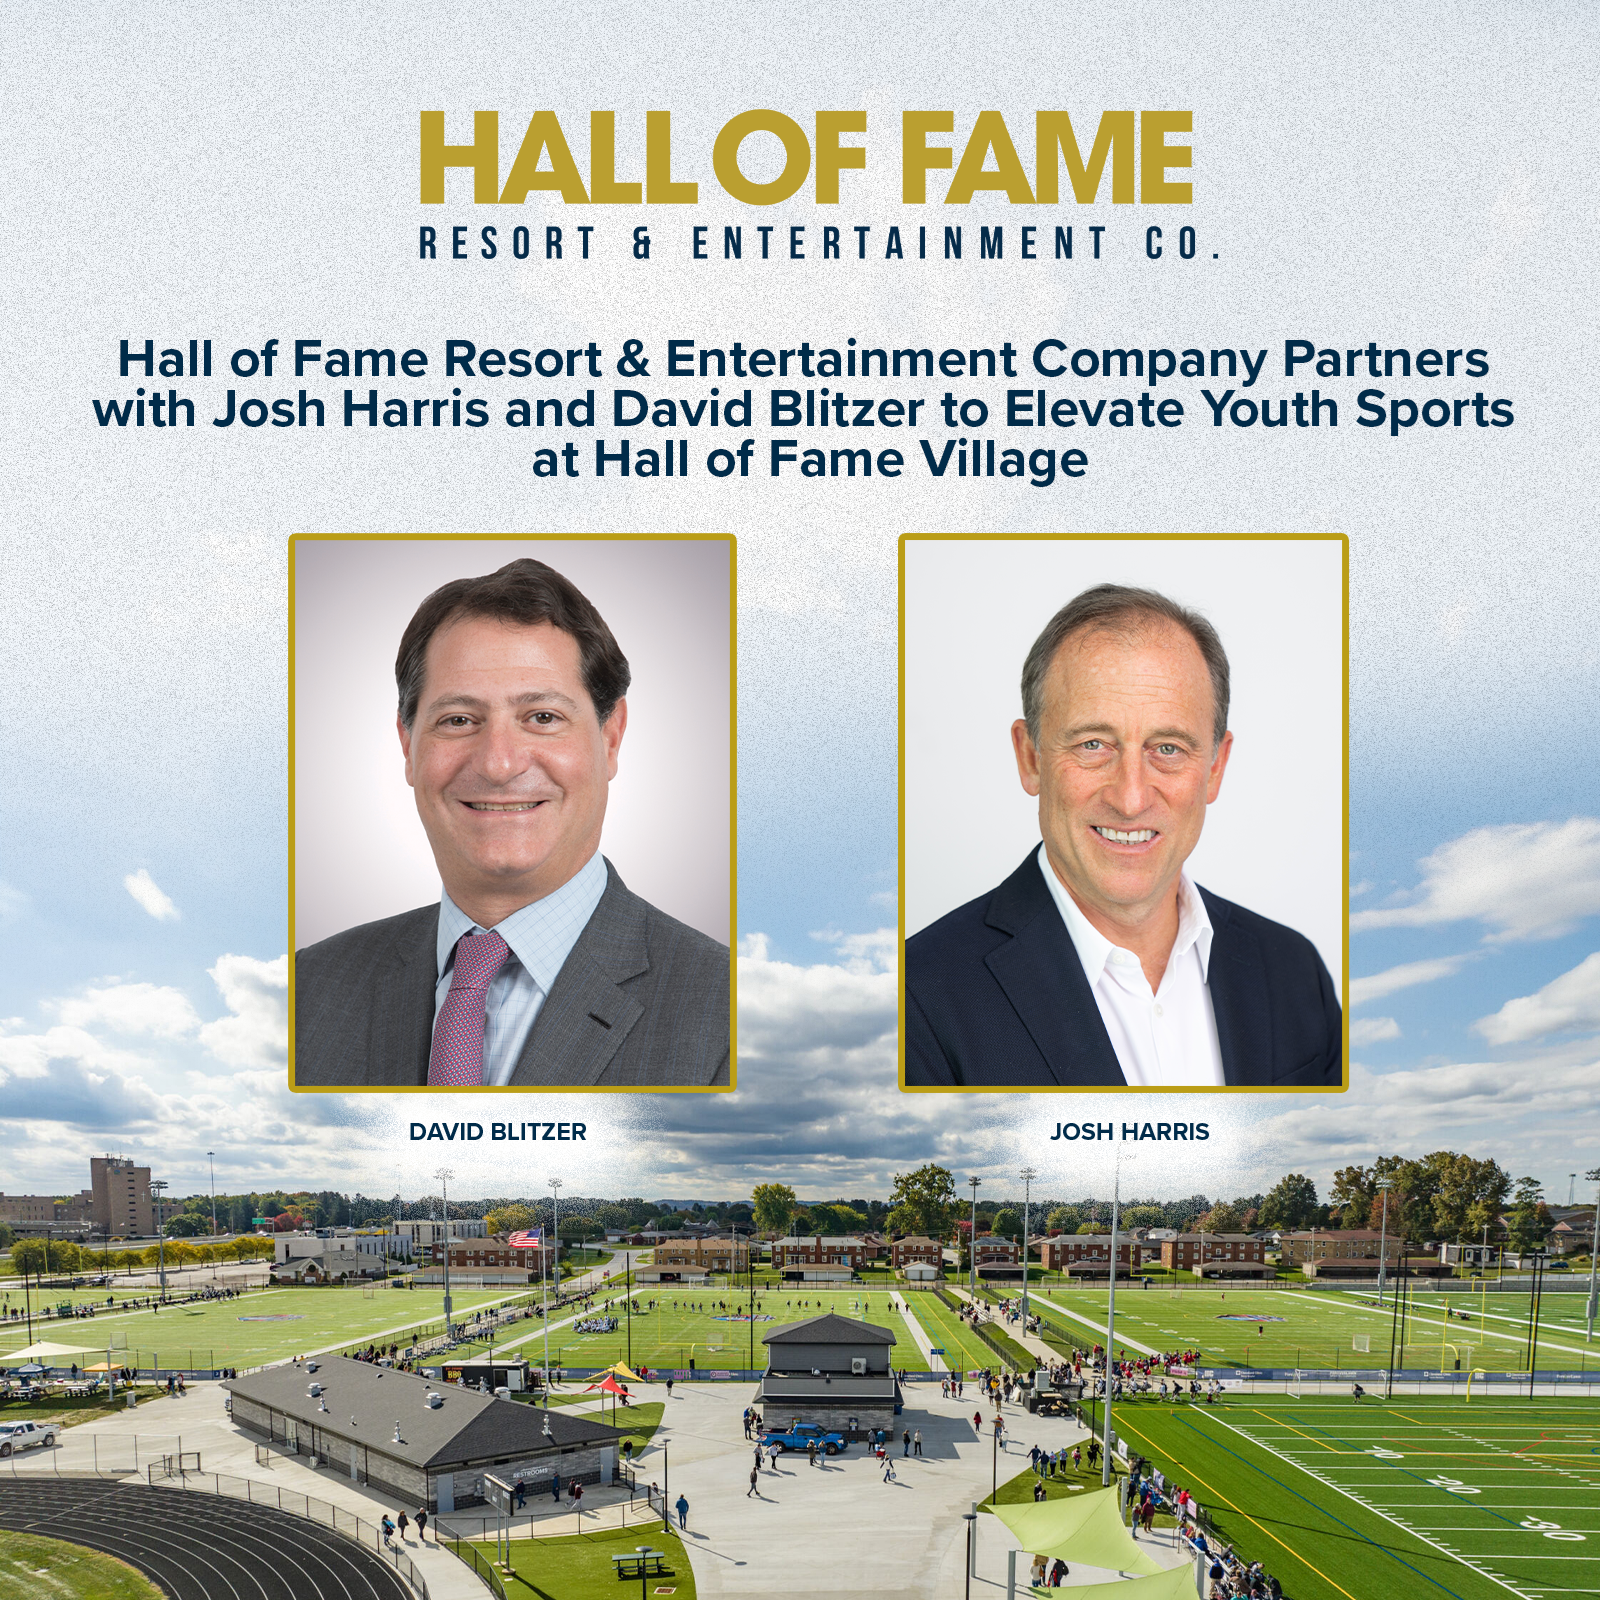 Hall of Fame Resort & Entertainment Company Partners with Josh Harris and David Blitzer to Elevate Youth Sports at Hall of Fame Village